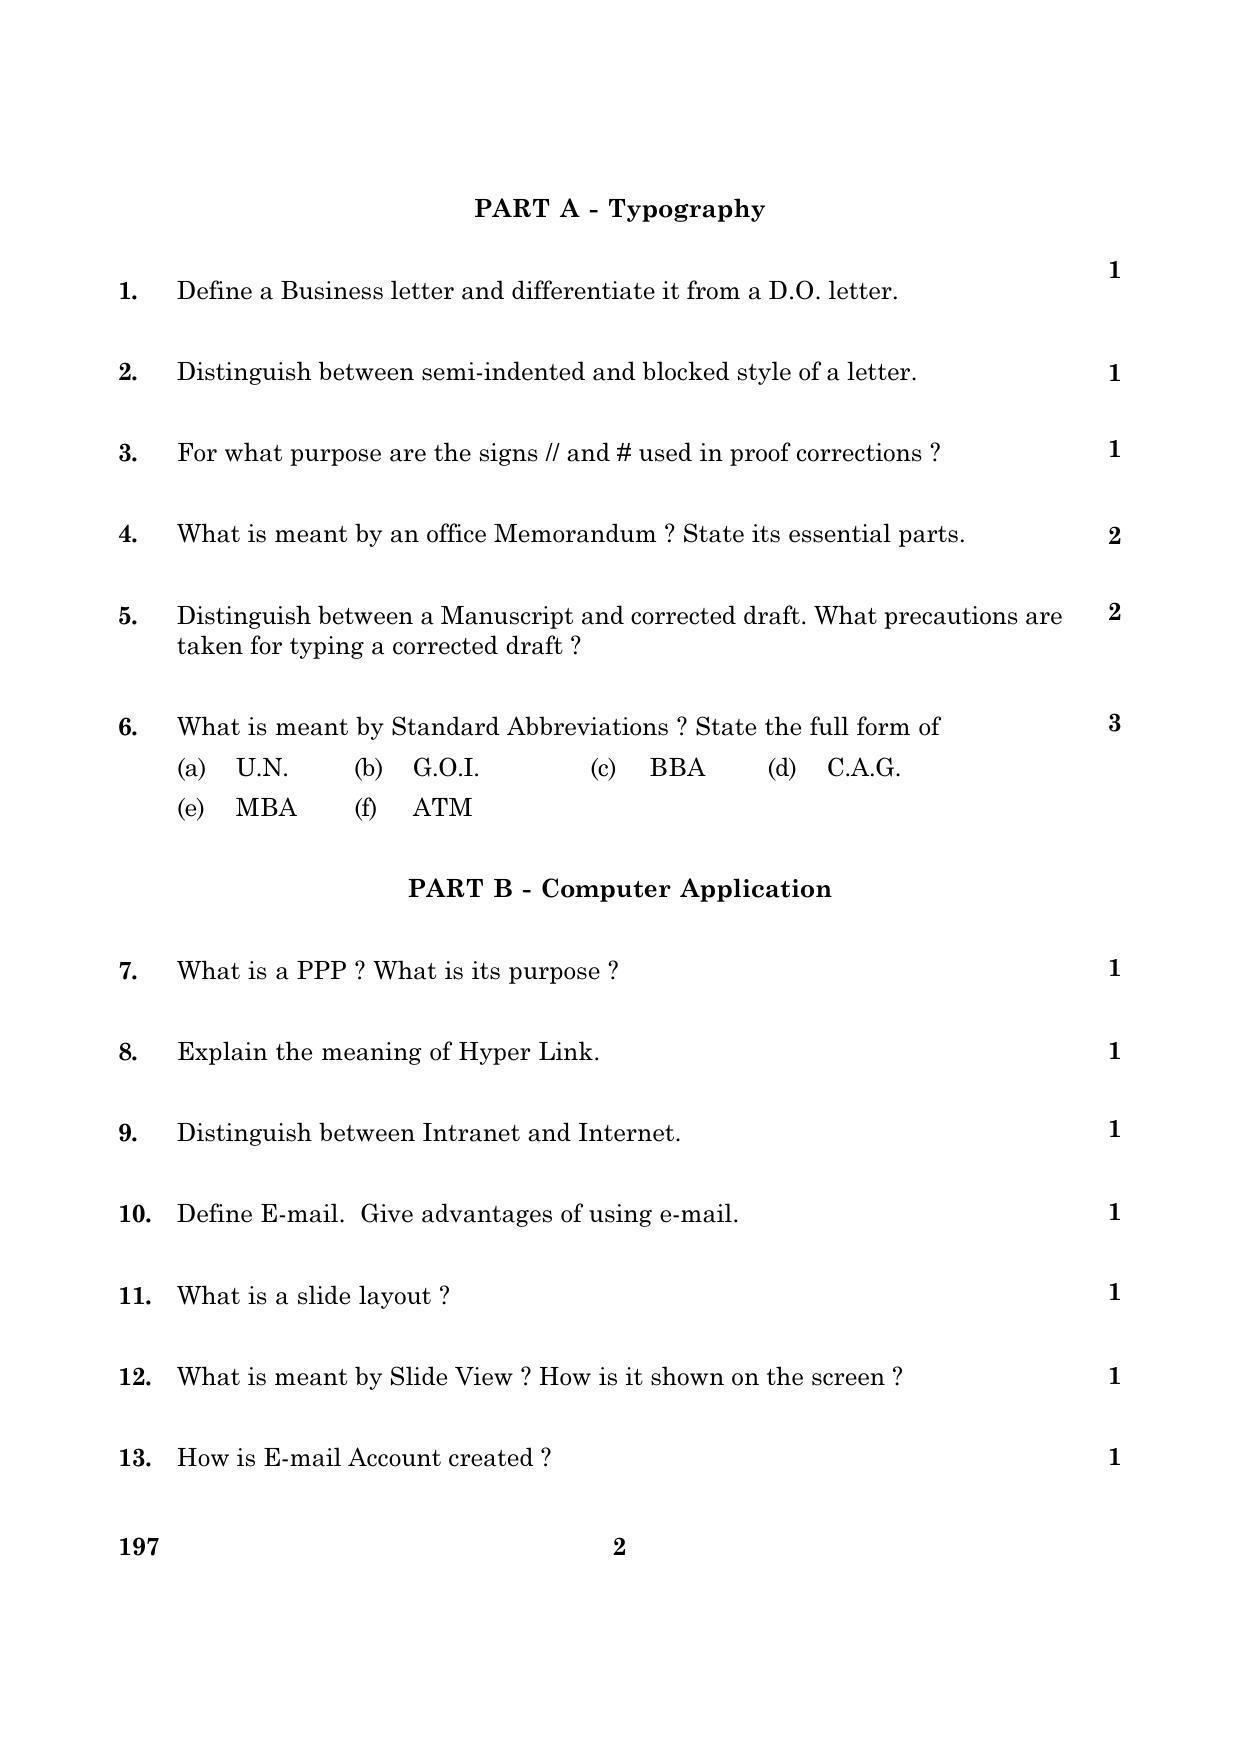 CBSE Class 12 197 TYPOGRAPHY & COMPUTER APPLICATION 2016 Question Paper - Page 2